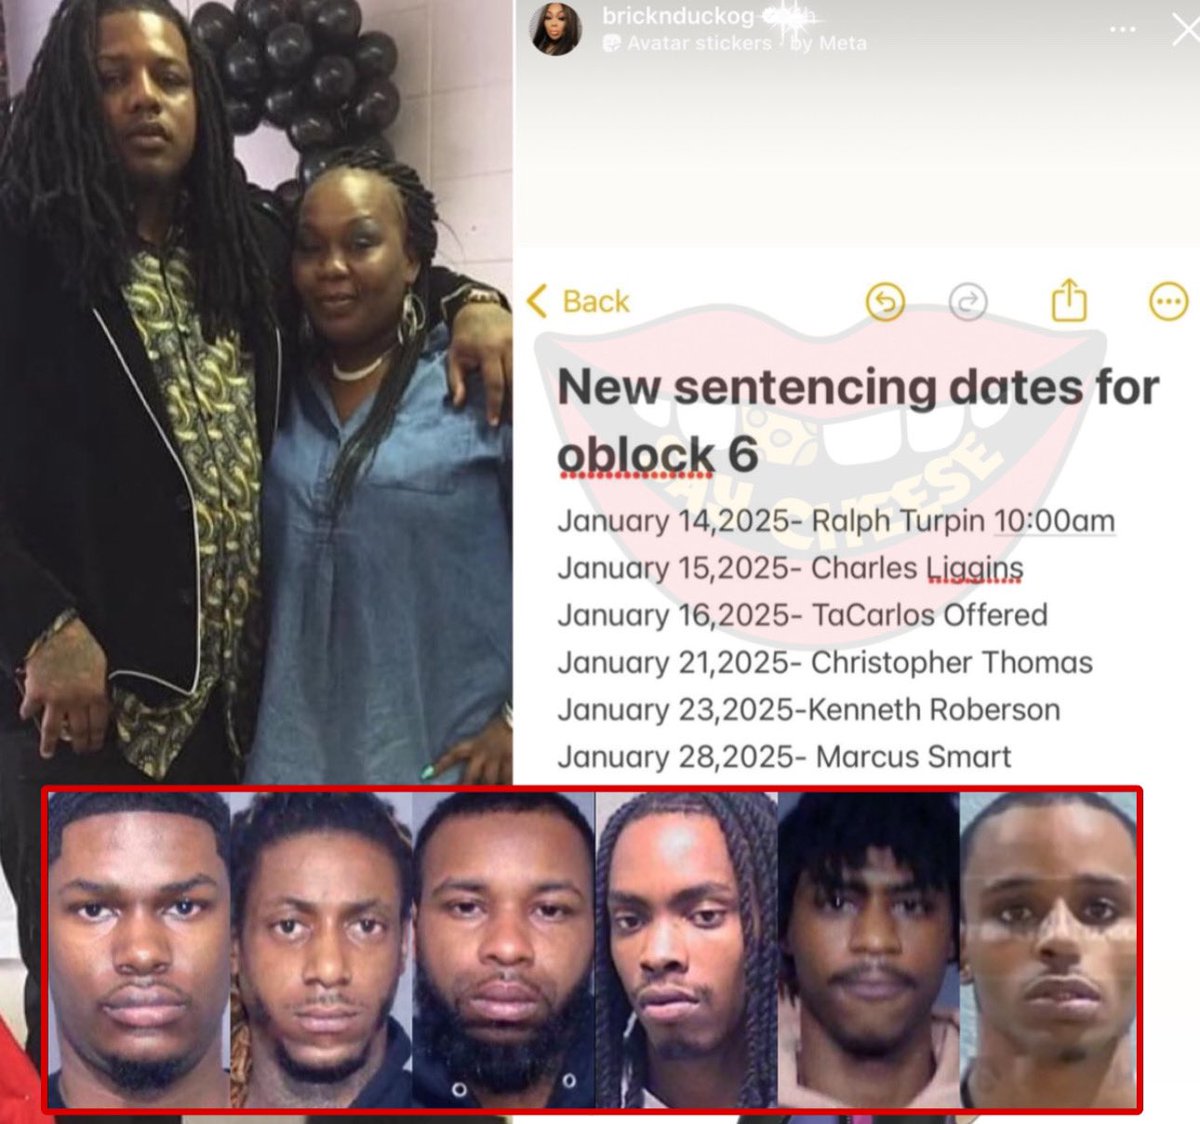 Mama Duck has revealed new sentencing dates for Oblock 6